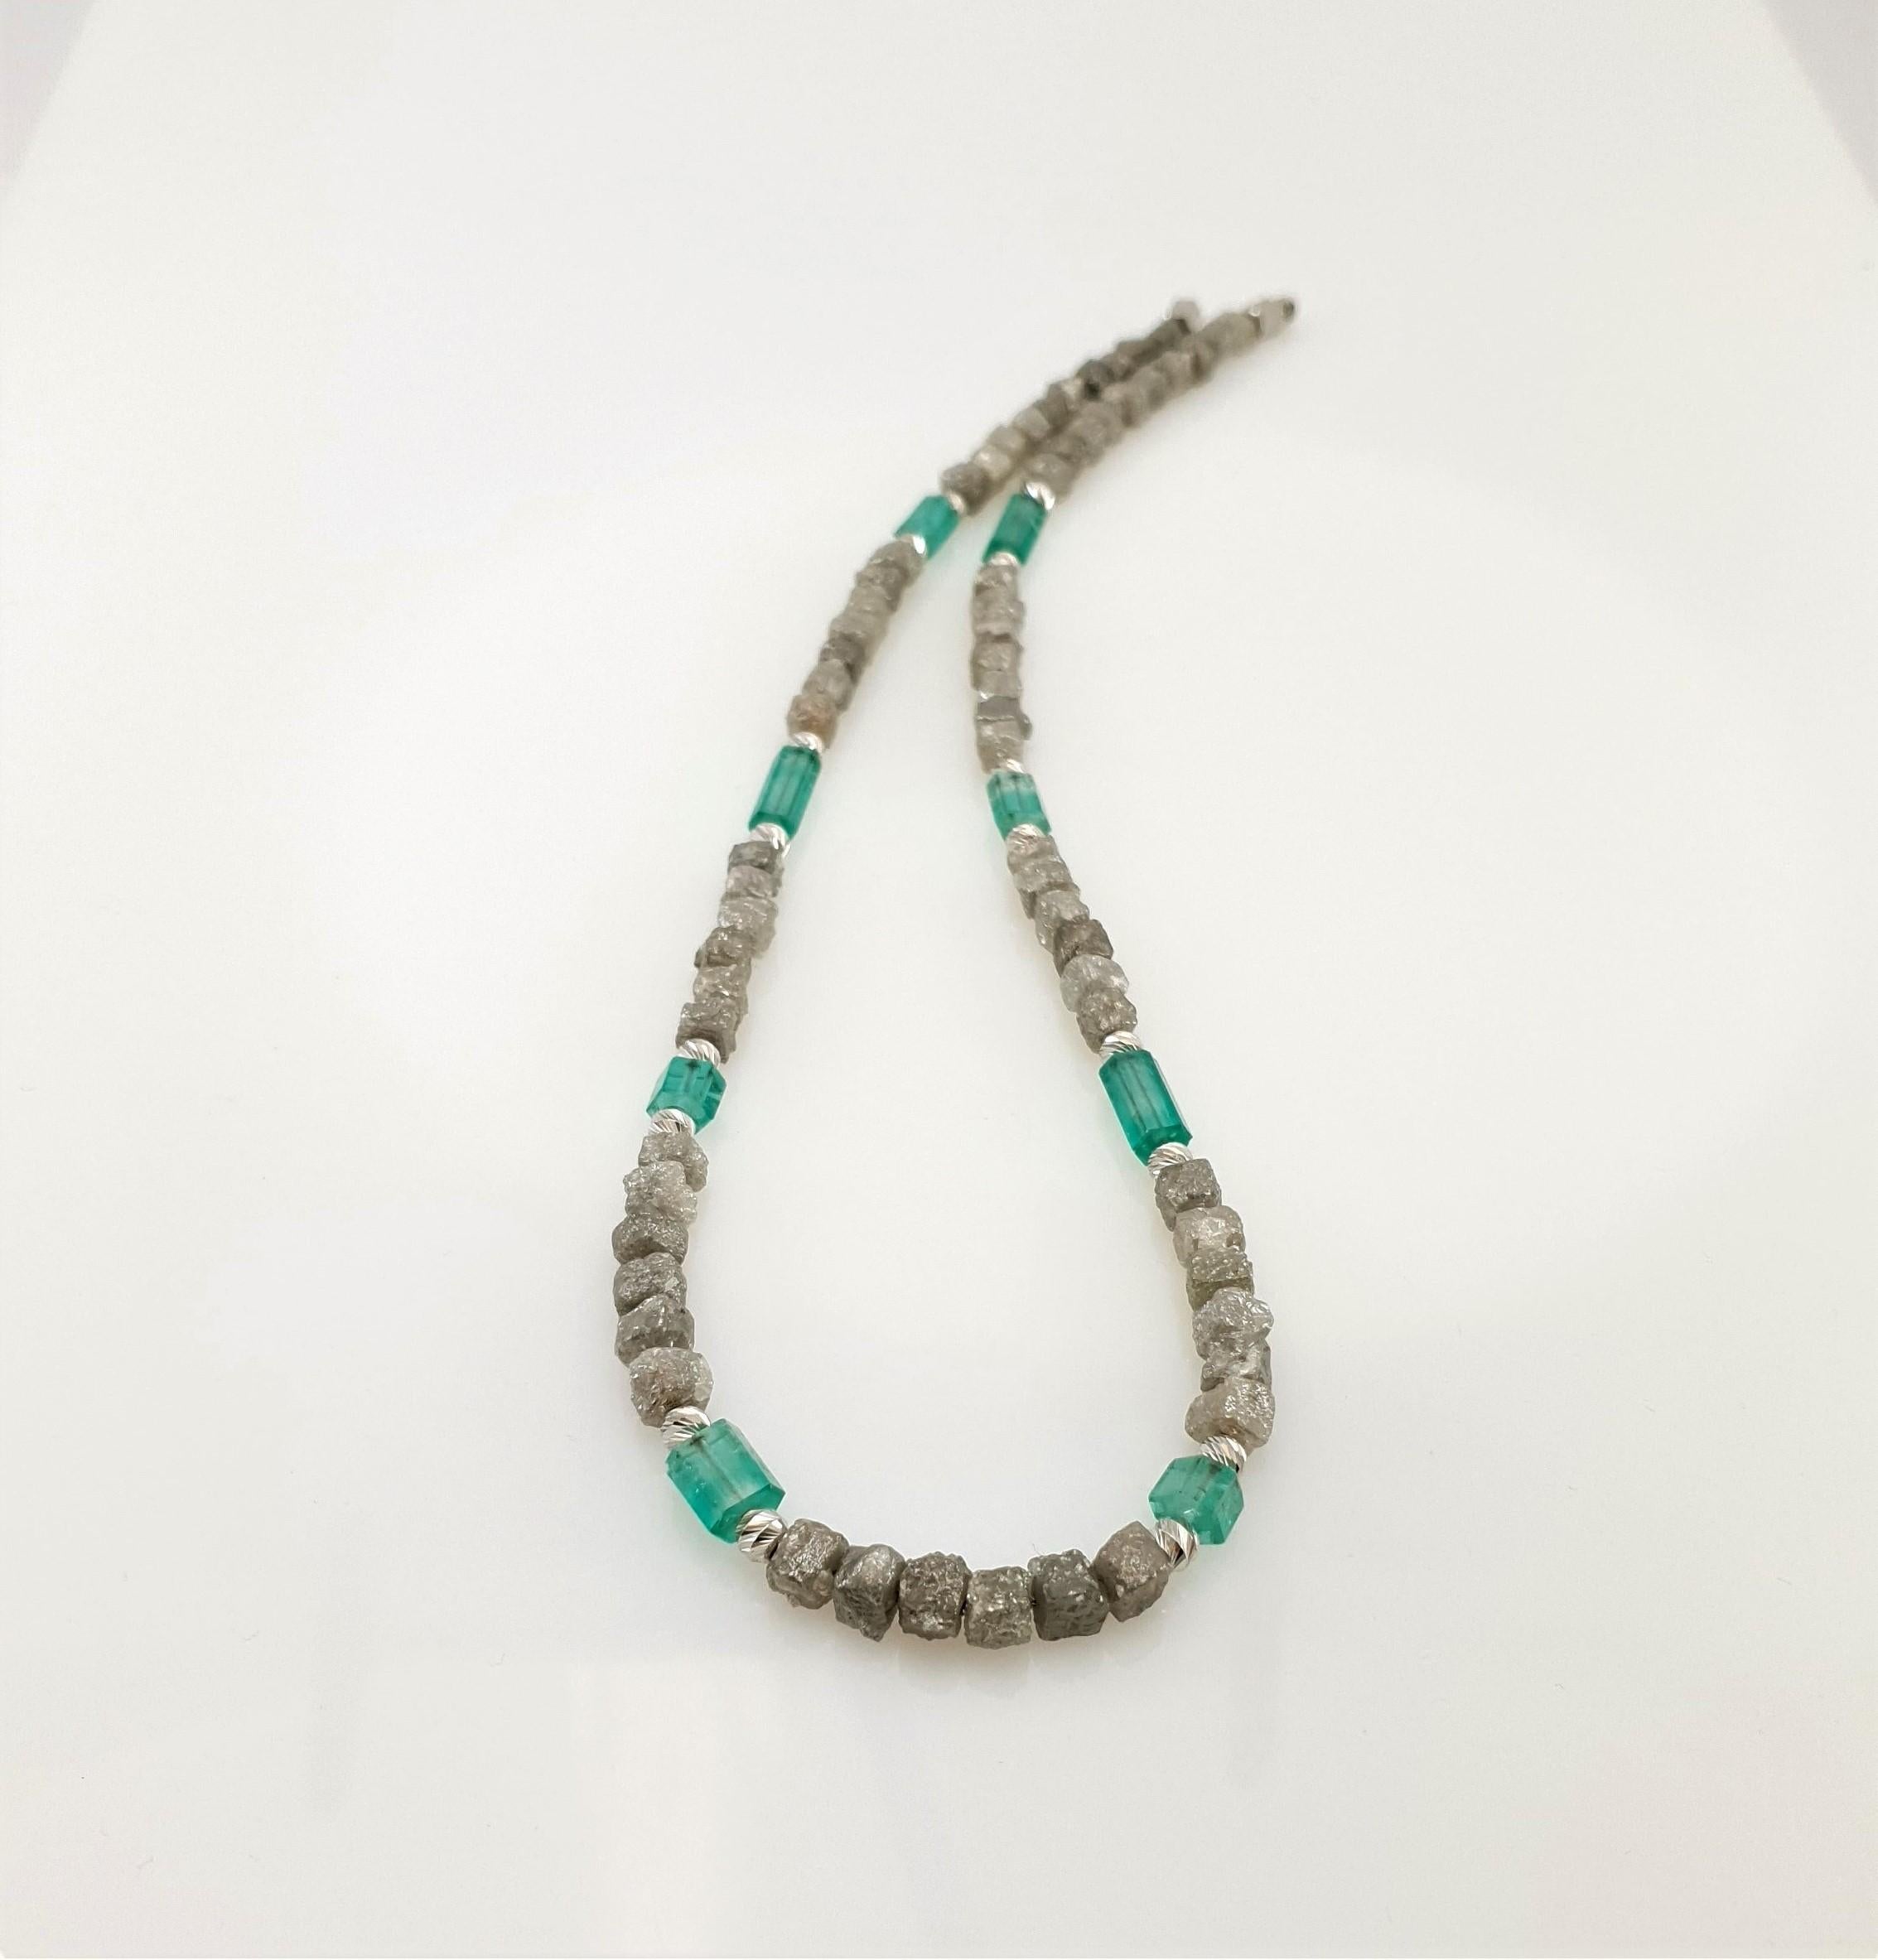 Natural Diamond and Emerald Crystals Beads Necklace with 18 Carat White Gold For Sale 5